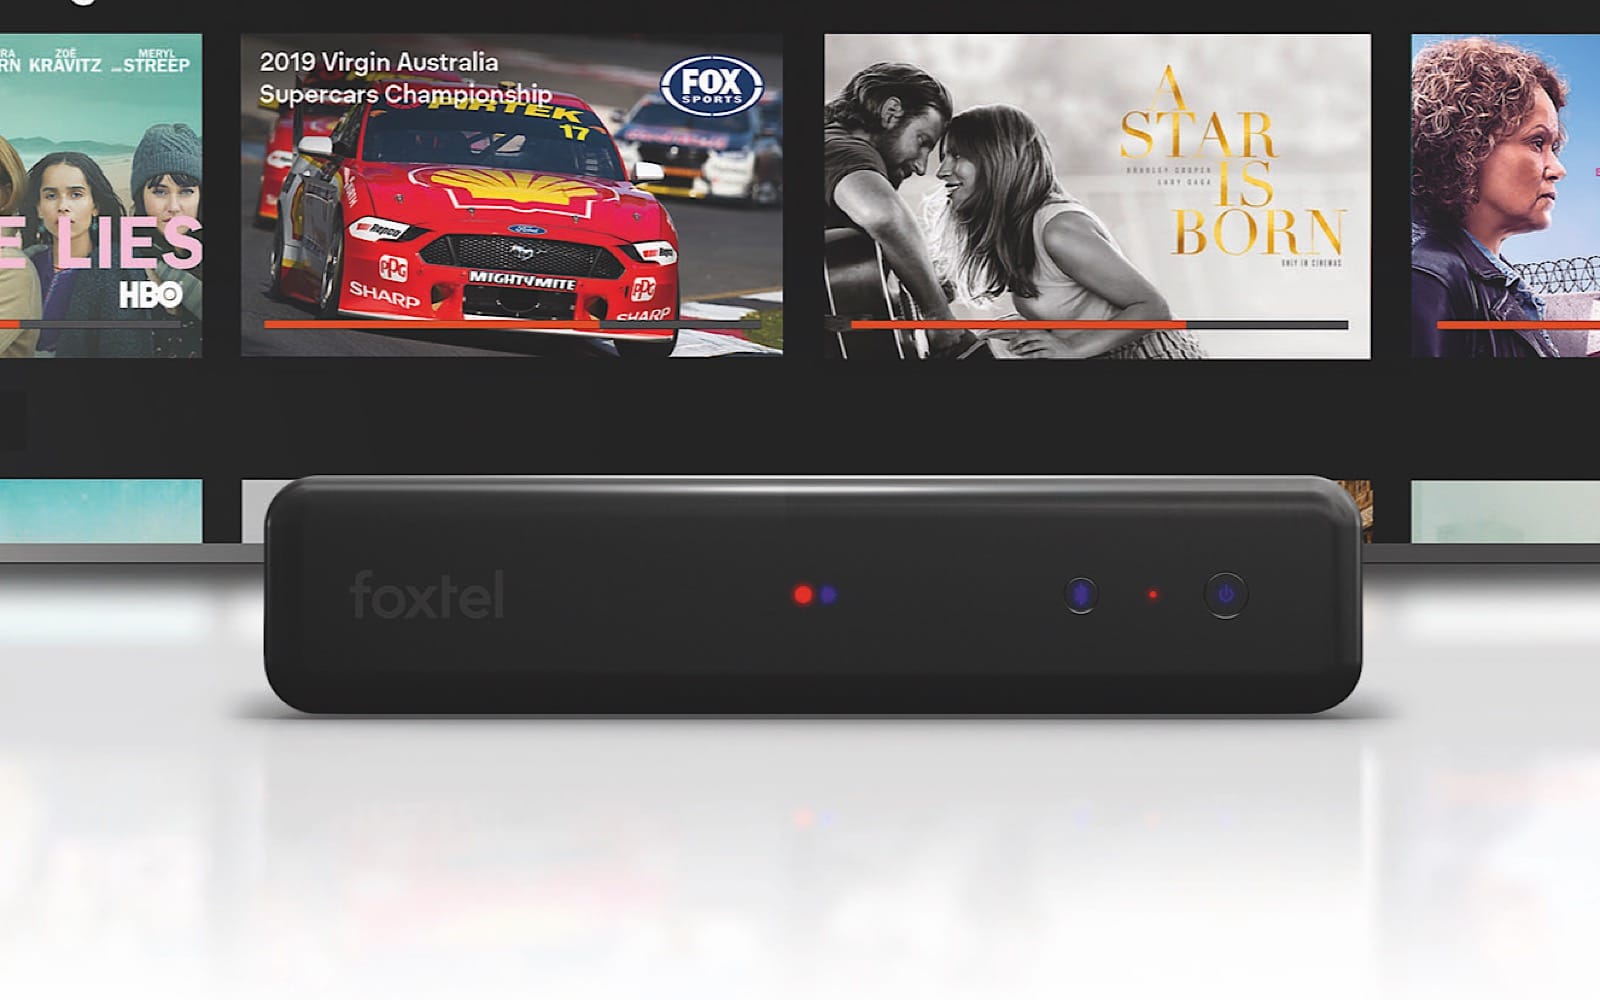 Foxtel and Netflix together at las